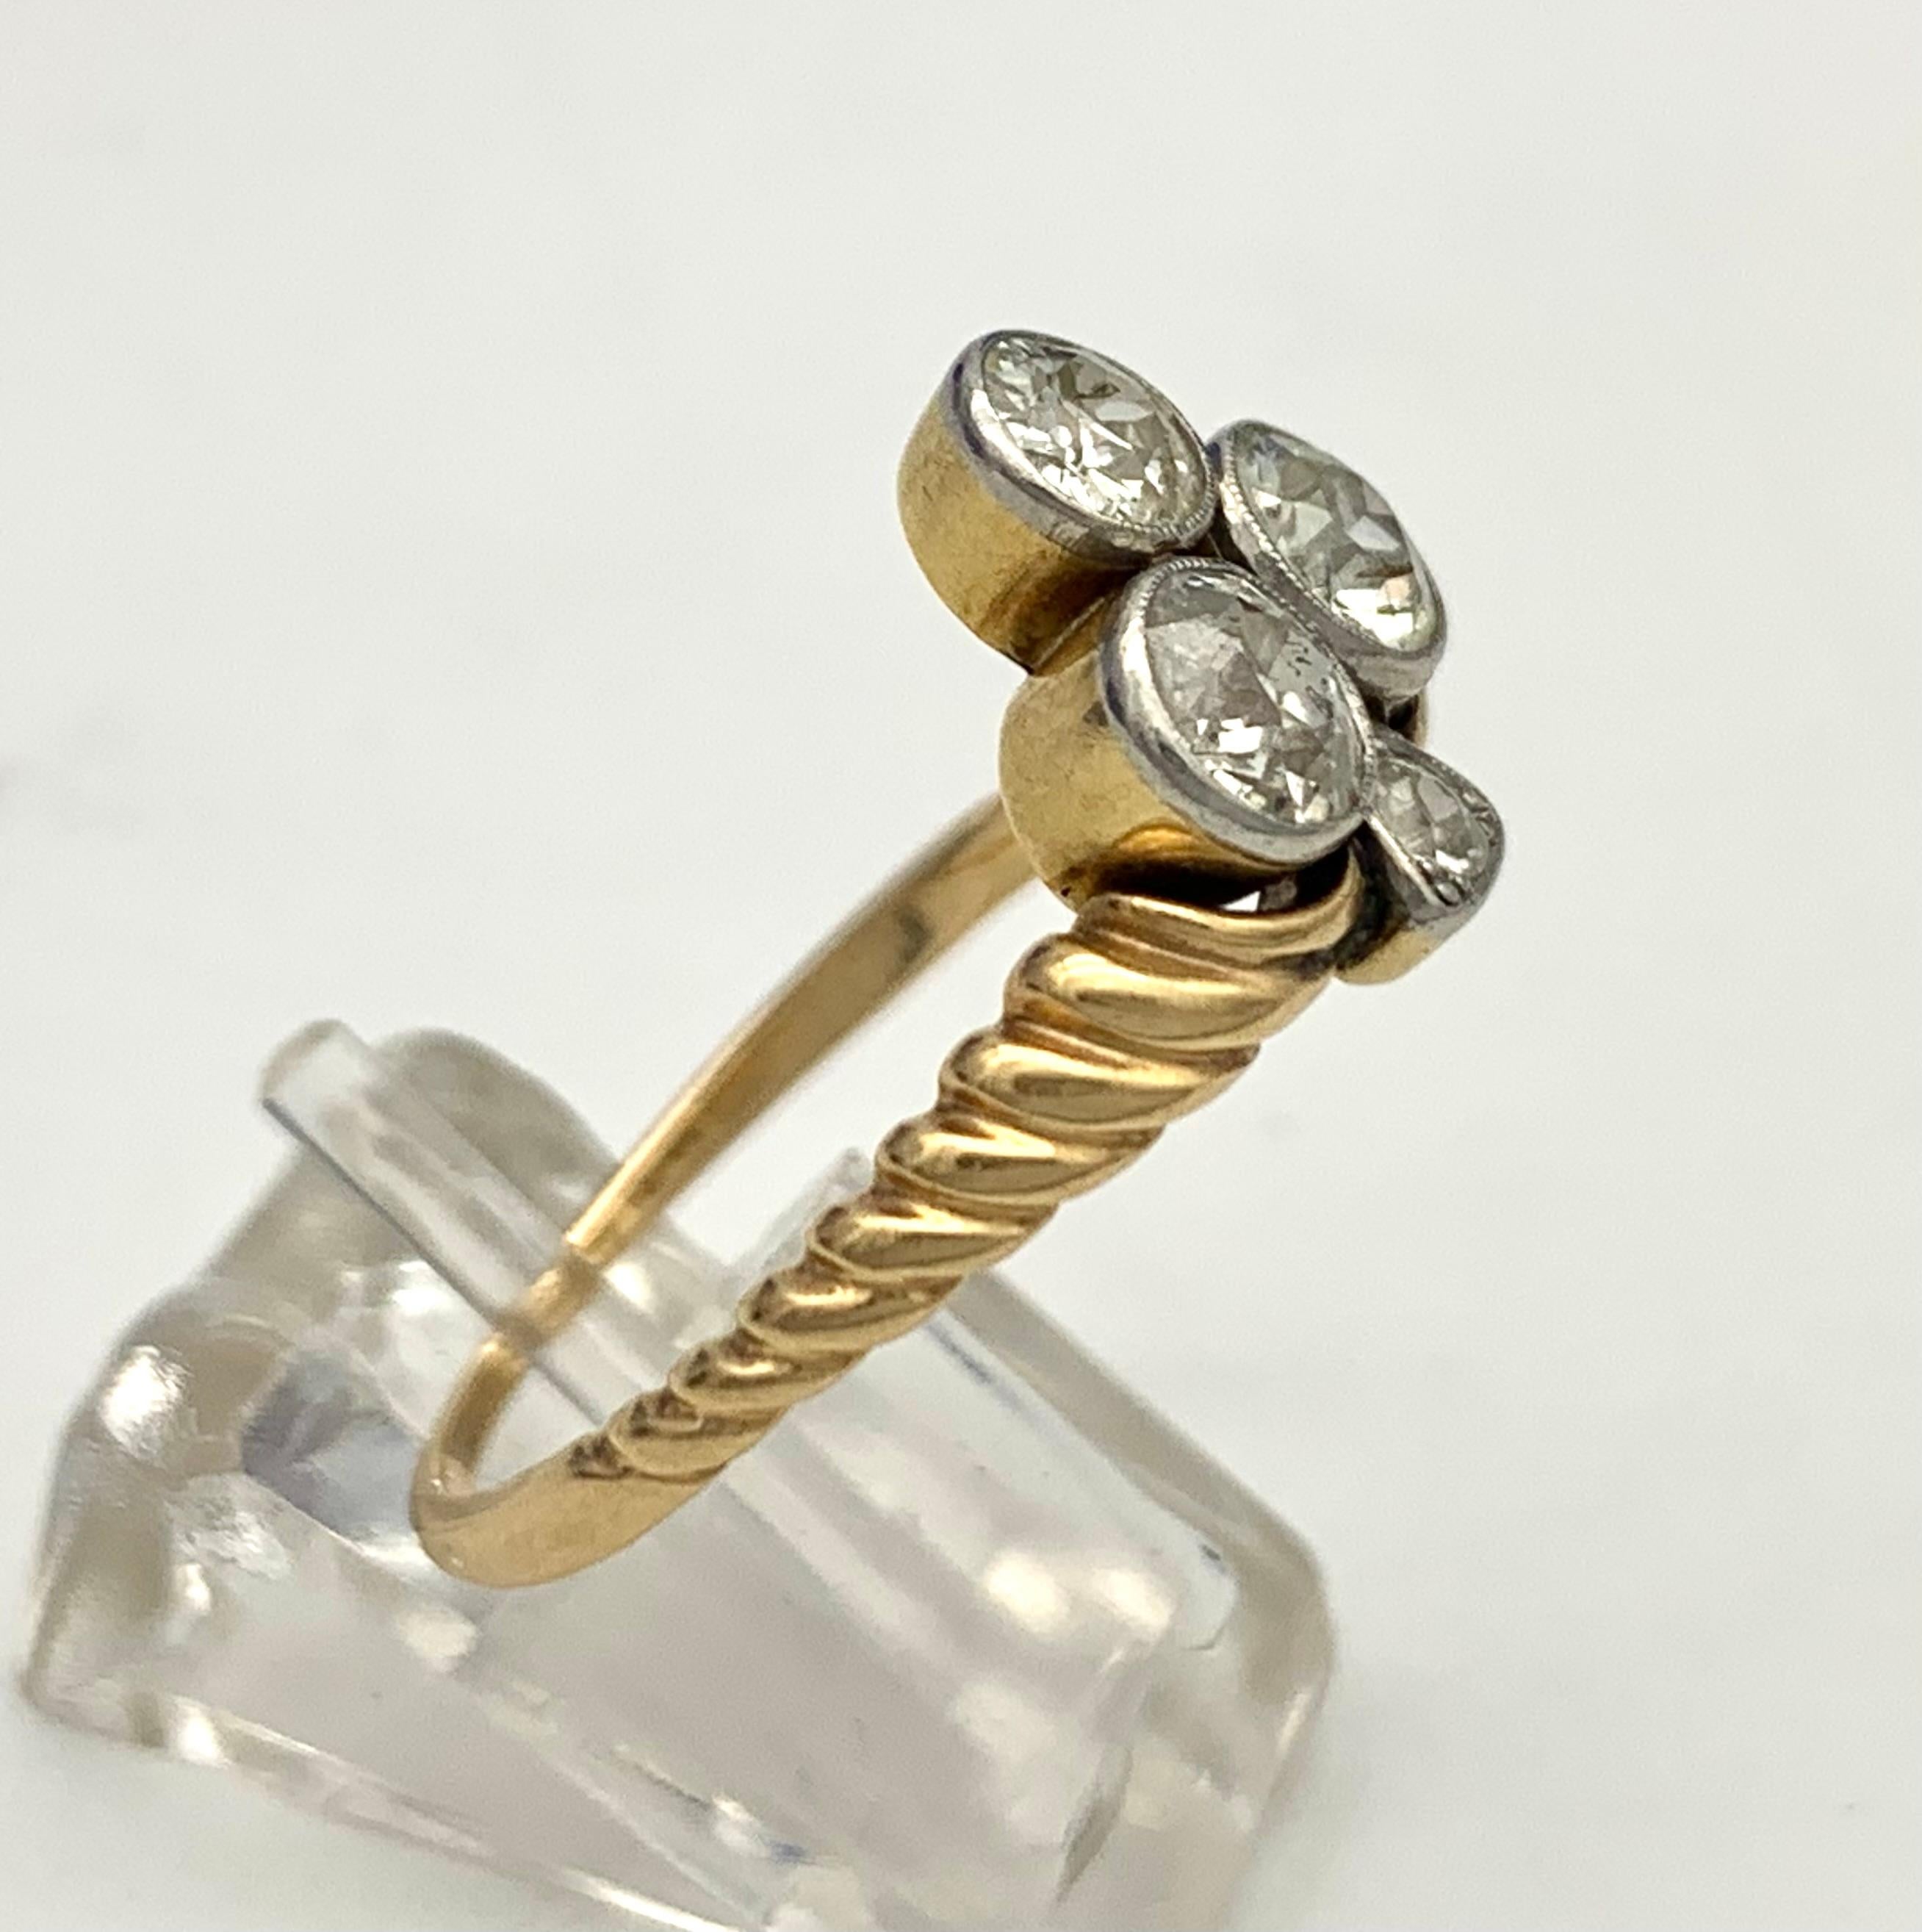 This elegant ring was made towards the end of the 19th century in Austria.
The trefoil consists out of three larger and one smaller diamond.
Three round diamonds are mounted in platinum millegrain settings backed onto 14K yellow gold. The gold ring